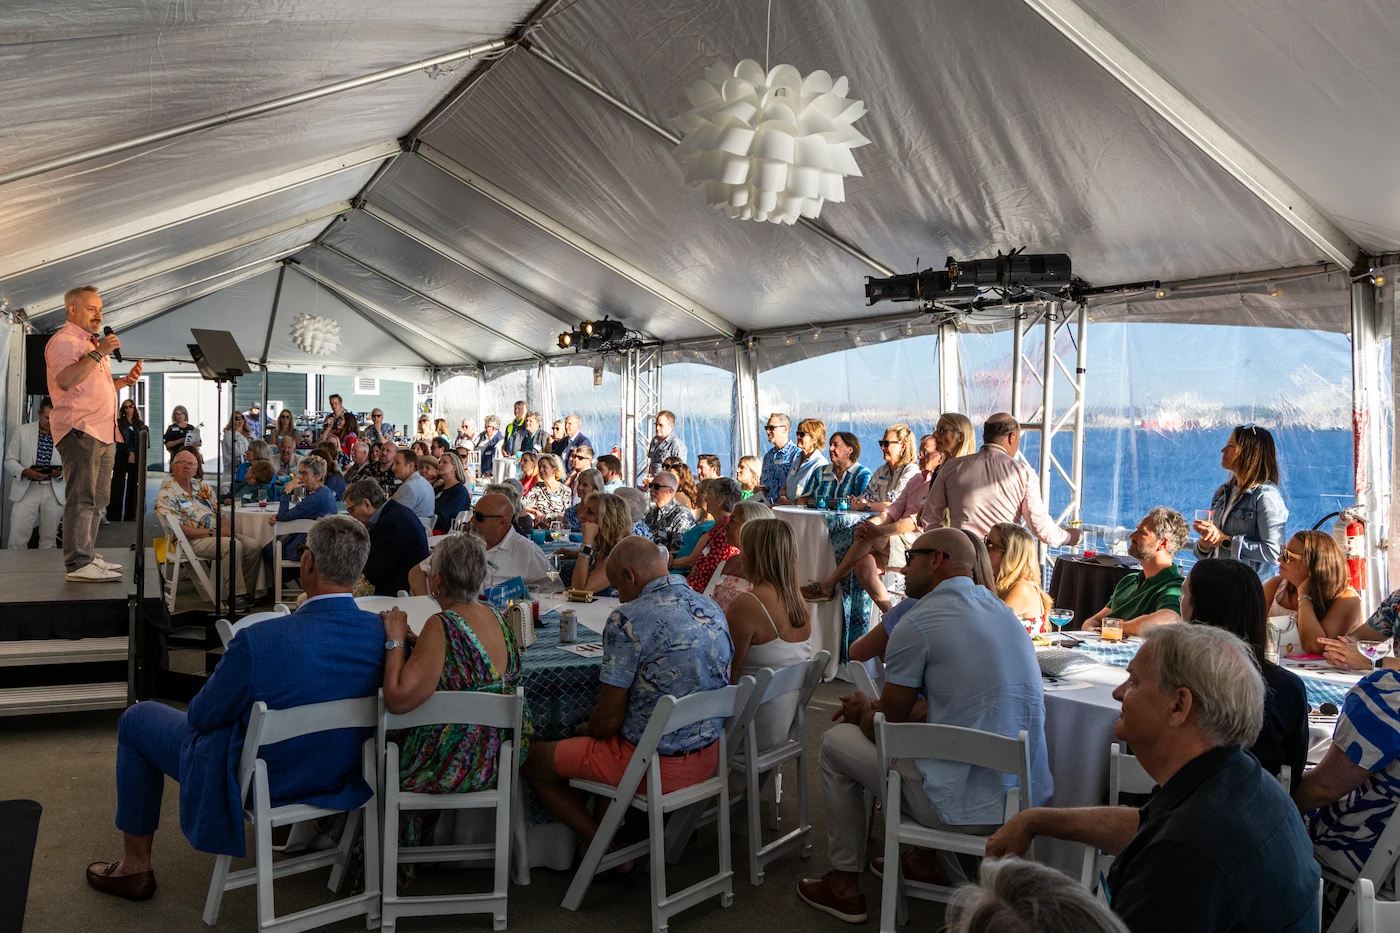 Guests at the Seattle Aquarium’s annual Splash event gathered under a tent with transparent sides, allowing for a view of a body of water and a sunset in the background. Guests listen to Jim Wharton speak on a stage at the front as he speaks into a microphone while facing the seated audience.